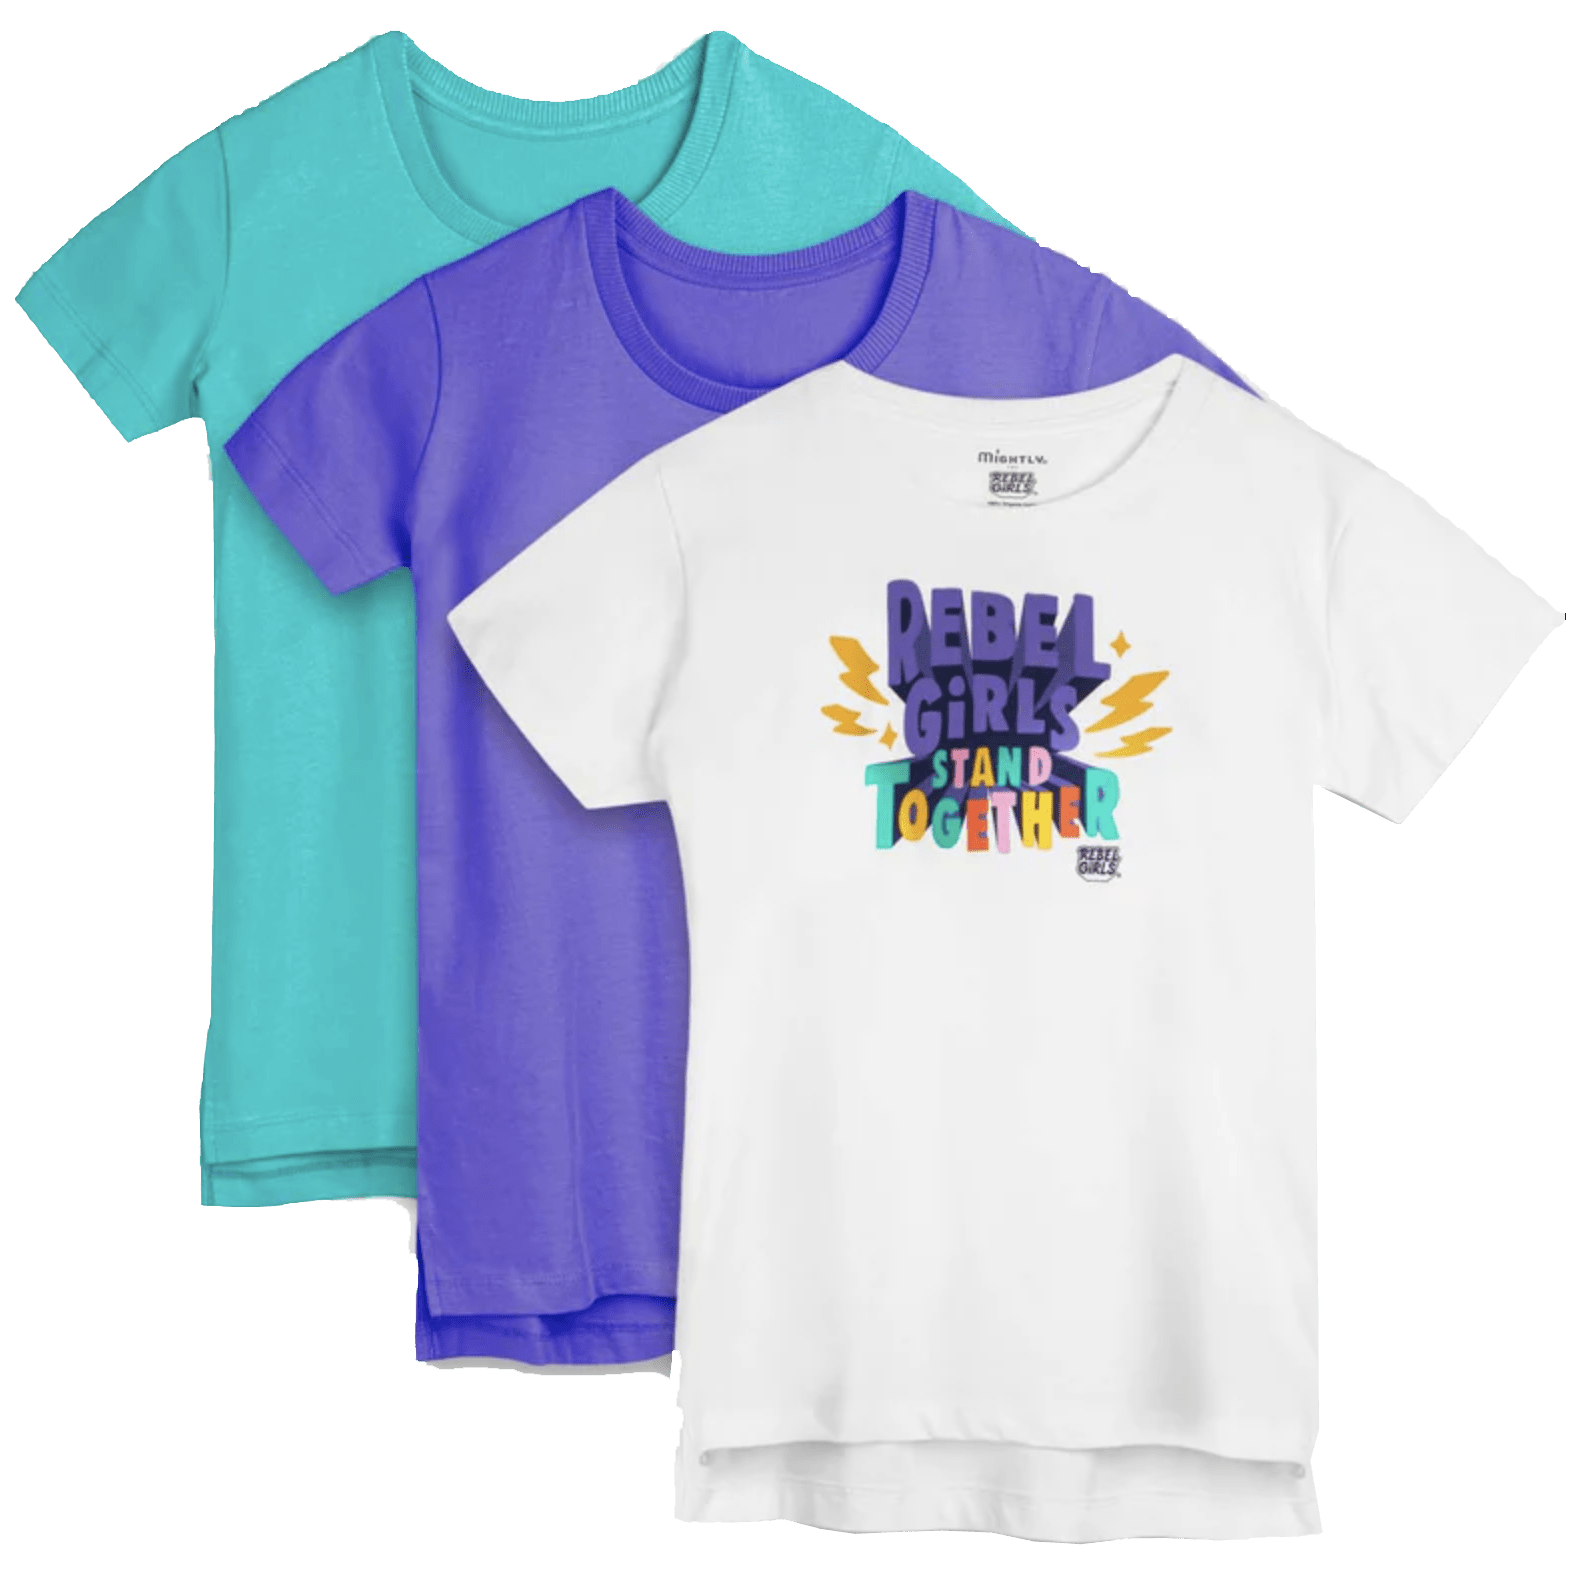 Kids and Toddlers Organic Cotton Extended-Length T-Shirts 3-Pack